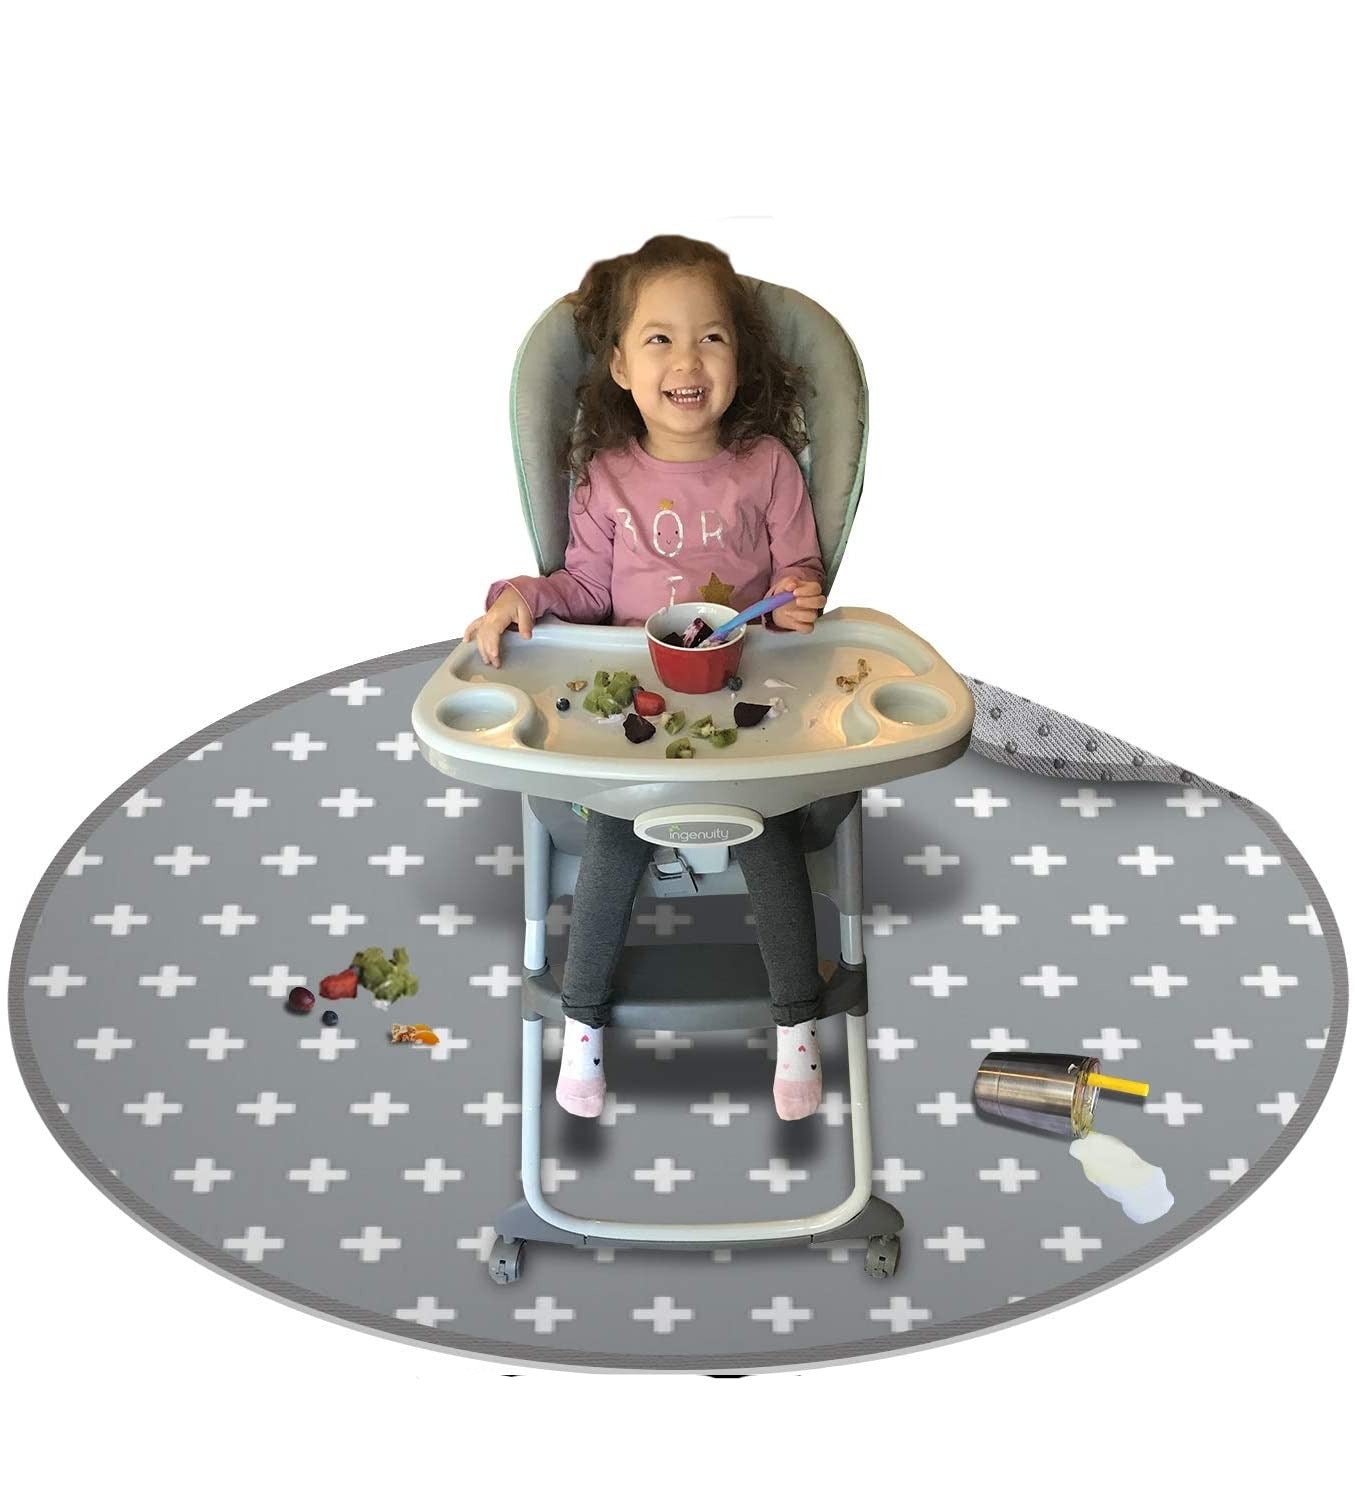 Splat Mats For Under High Chair (Round Plus Signs)